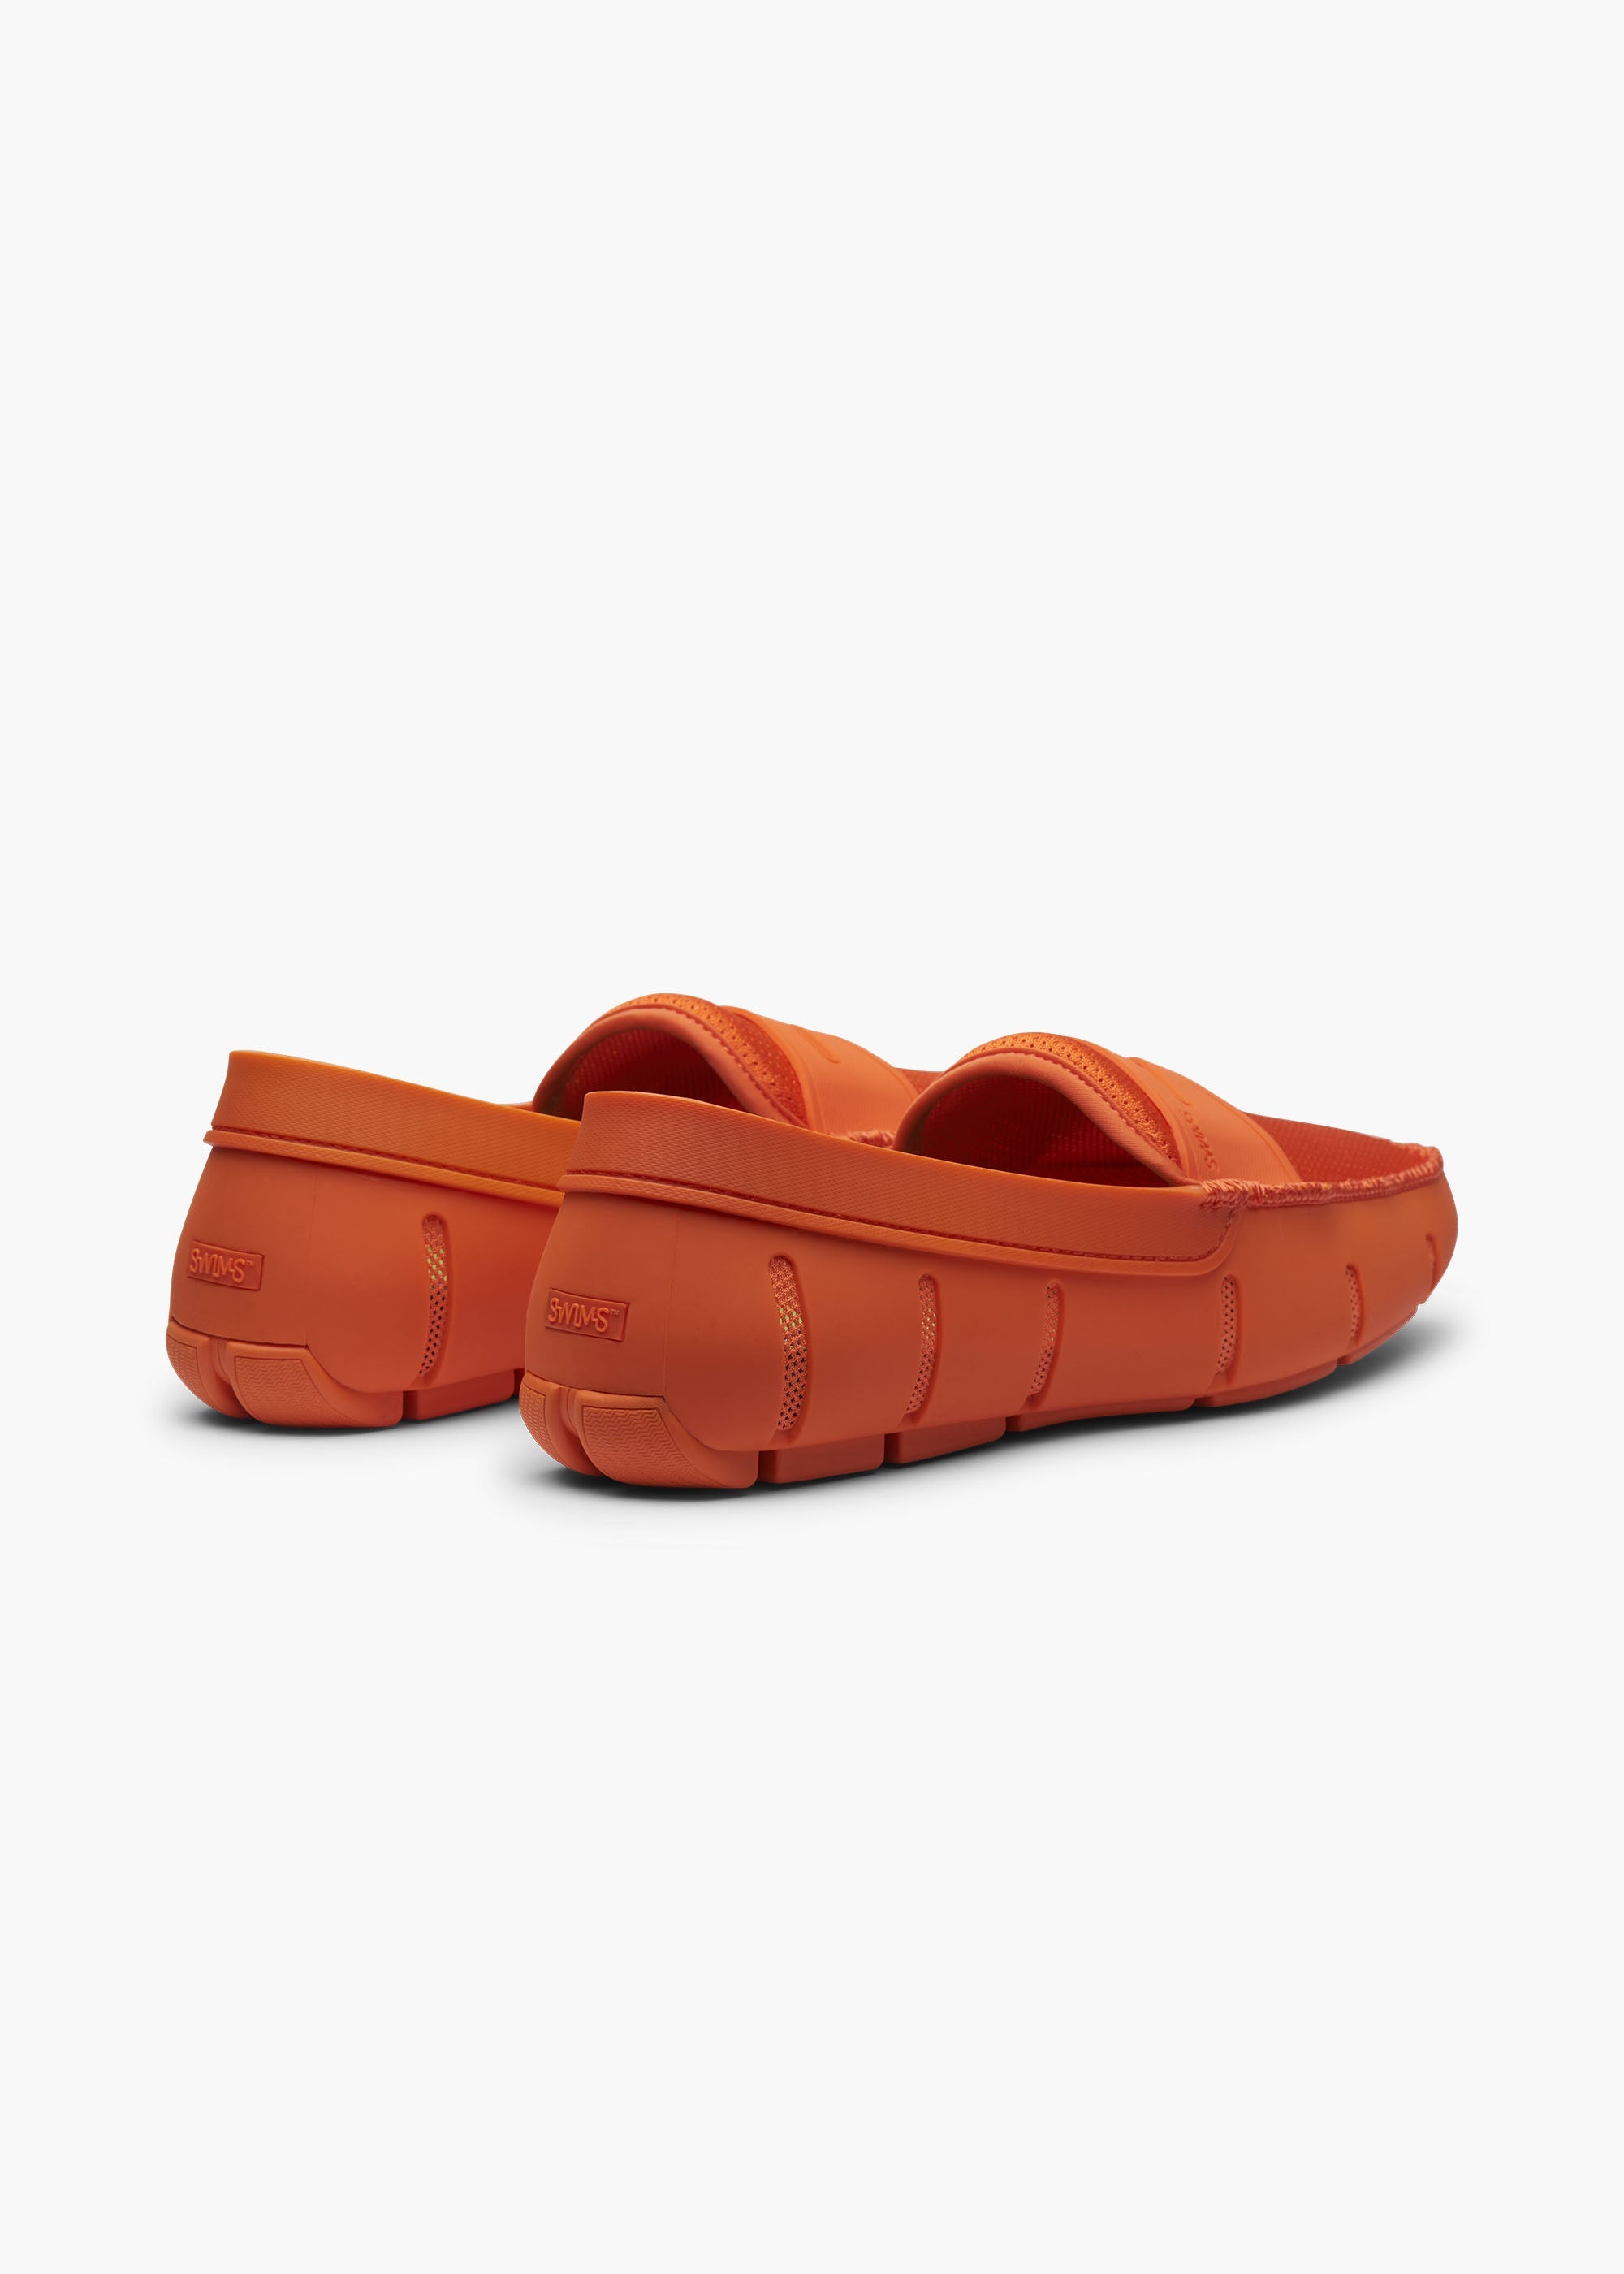 Penny Loafer - background::white,variant::Coral